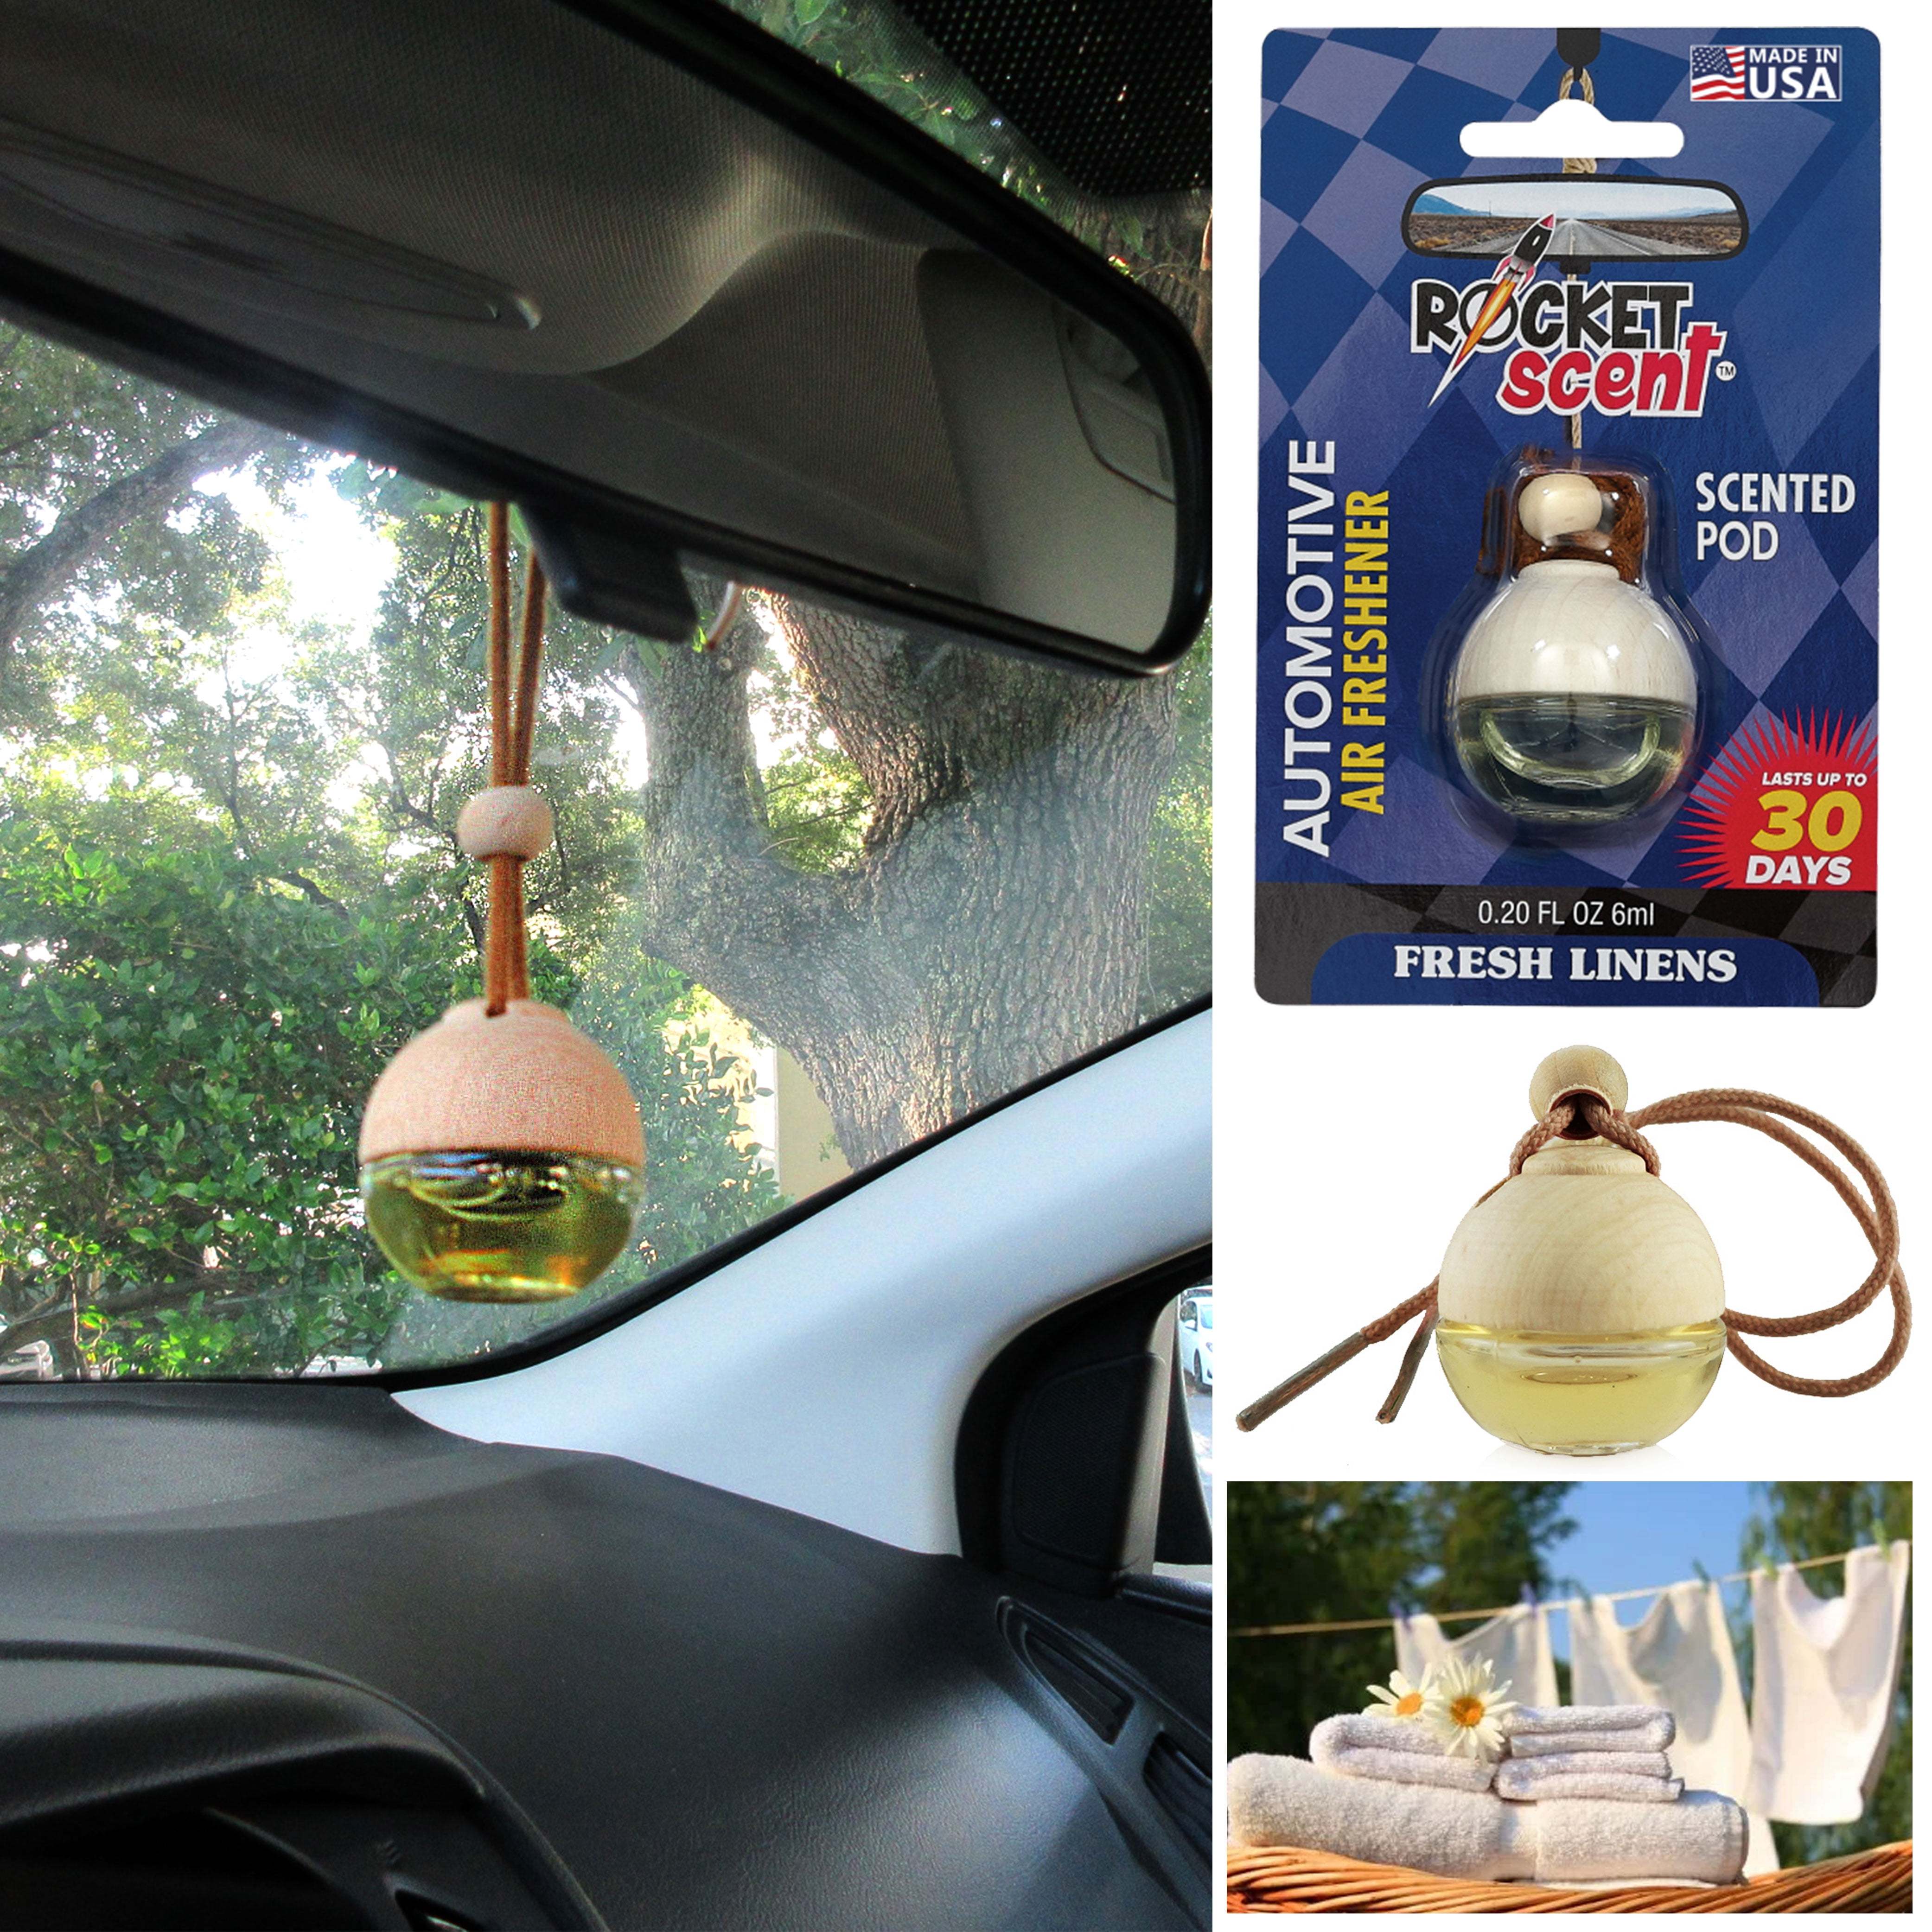 Car Luxury Perfume - Air Freshener - 1Fl Oz Luxury Essential Oil Diffuser  with Sticks - Long-Lasting Scent Air Purifier with Exquisite Aromas (Winter